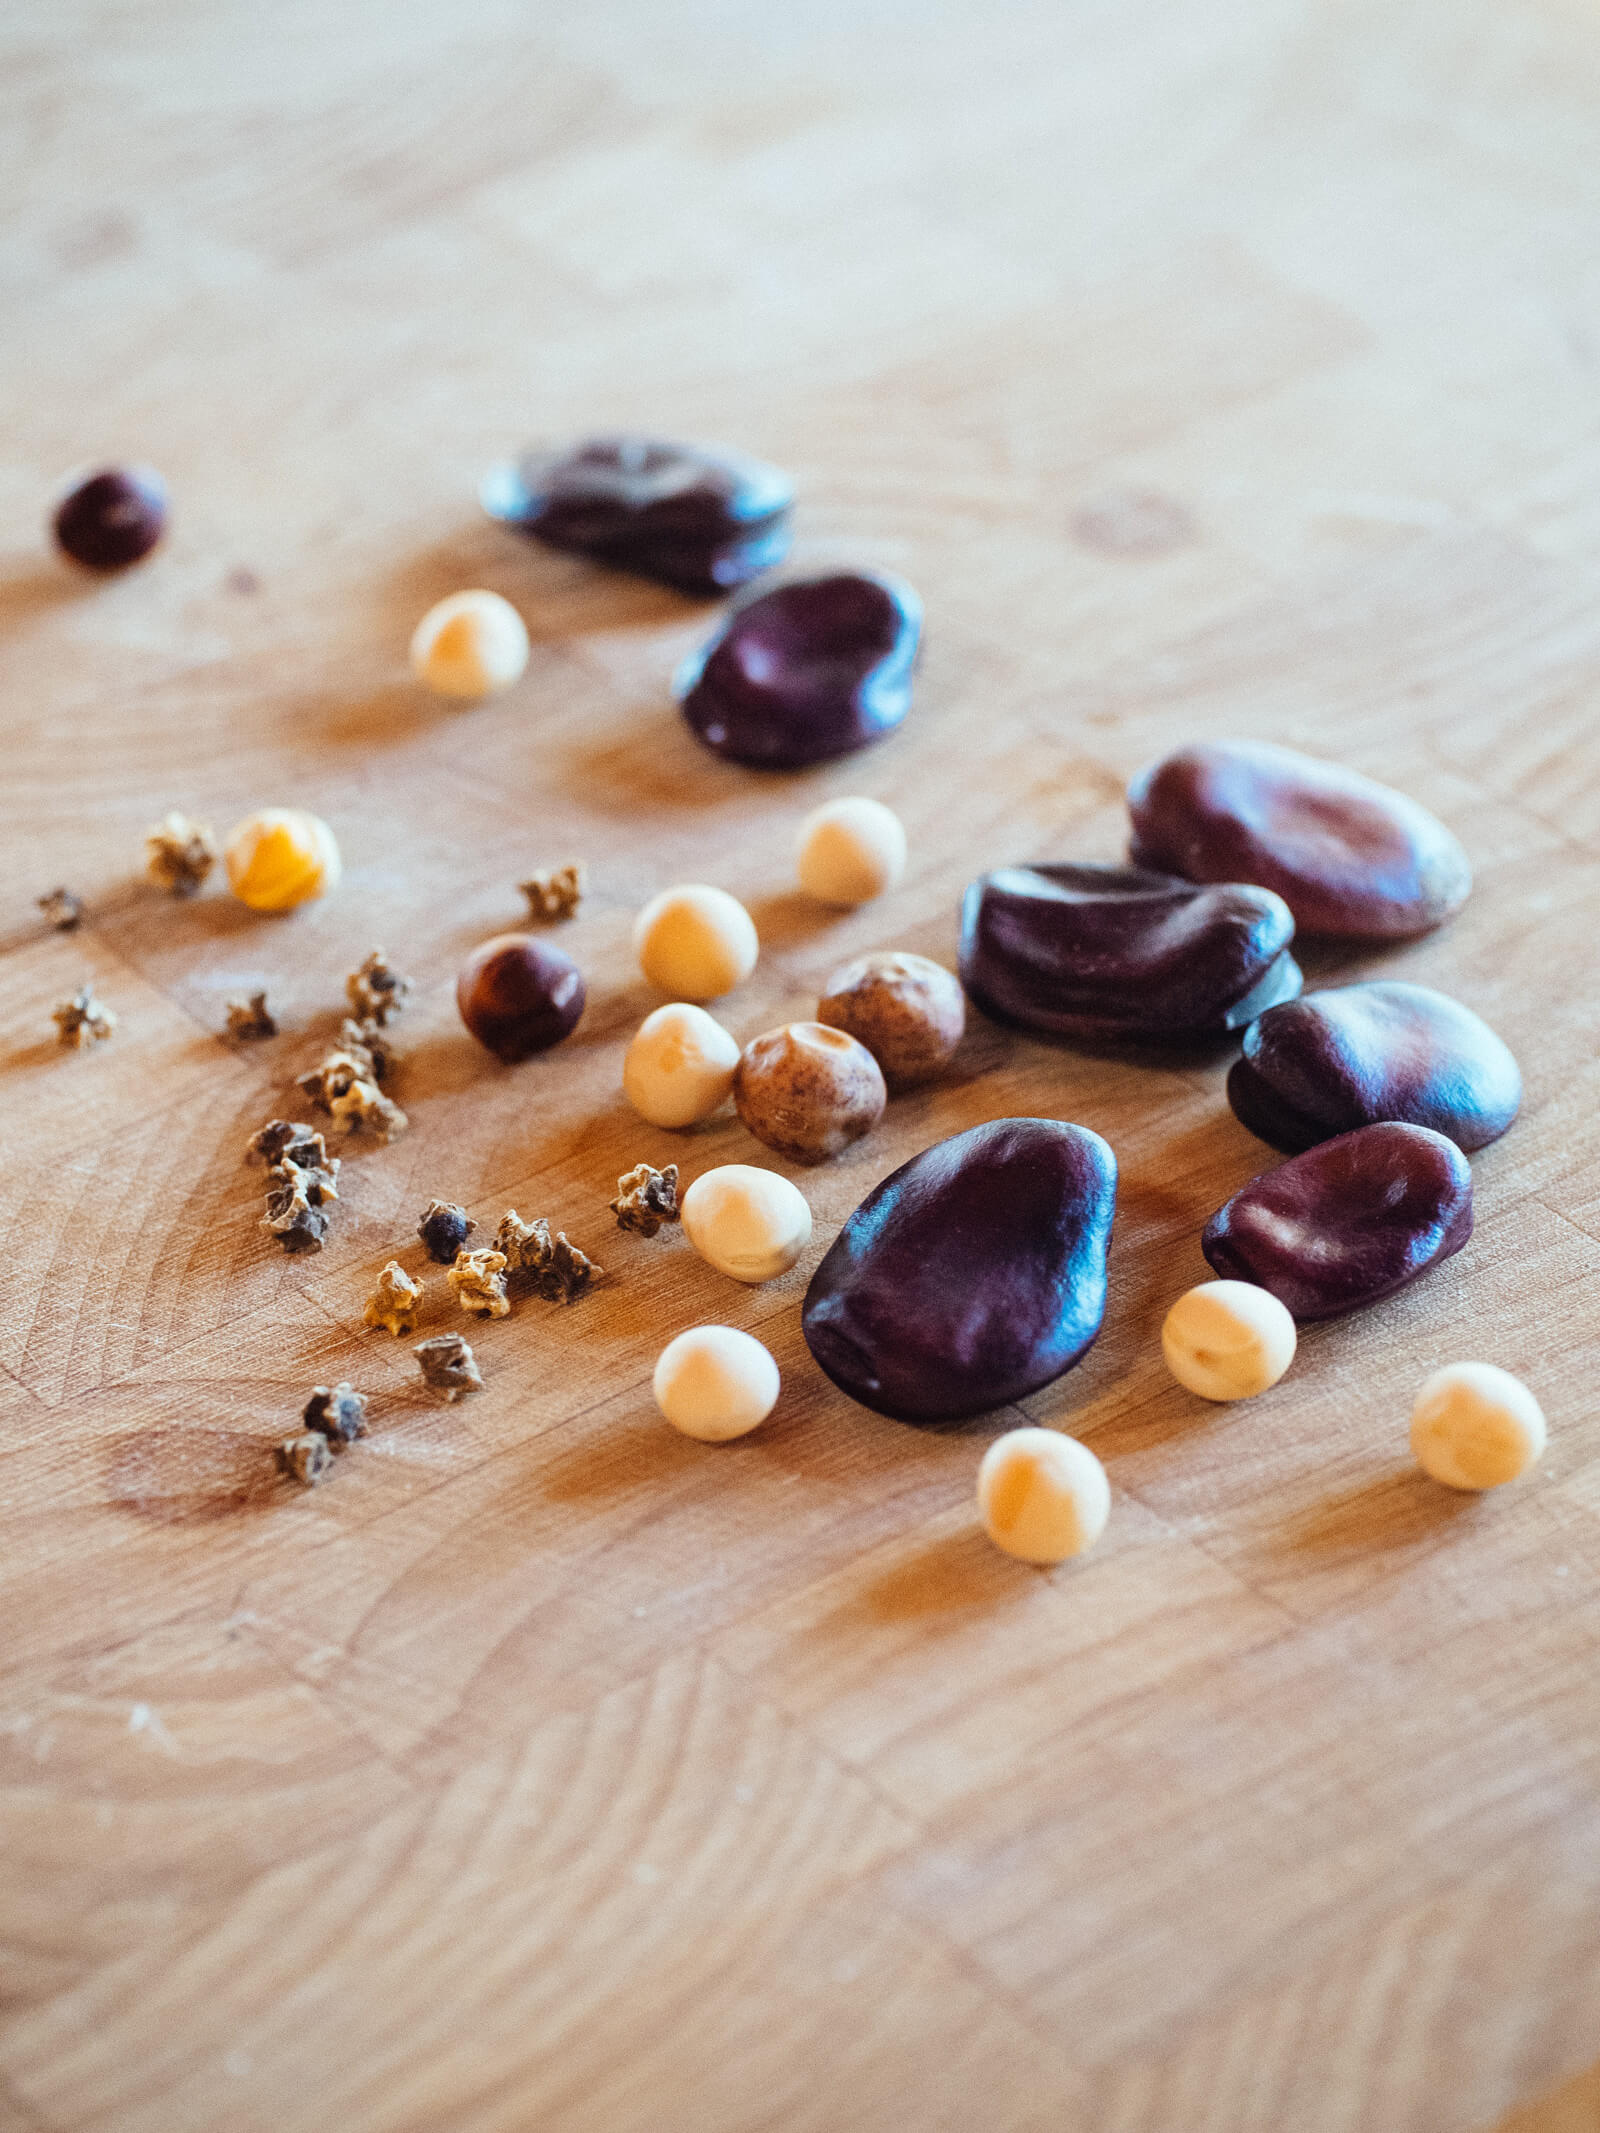 Saving seeds from homegrown plants